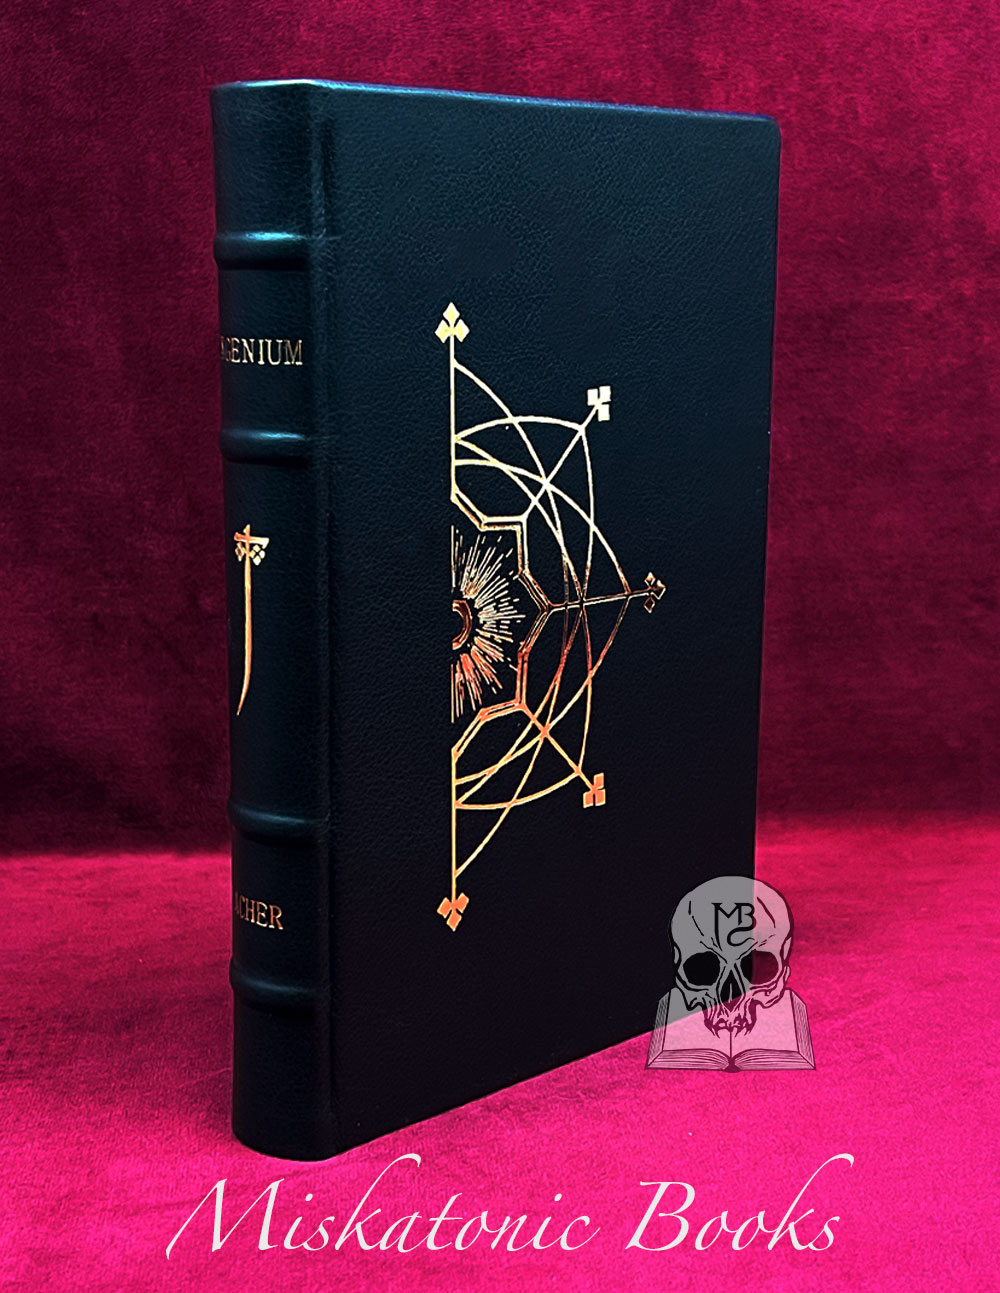 INGENIUM: The Alchemy of the Magical Mind by Frater Acher with Book Design and Artwork by Joseph Uccello - SIGNED, Deluxe Leather Bound Limited Edition